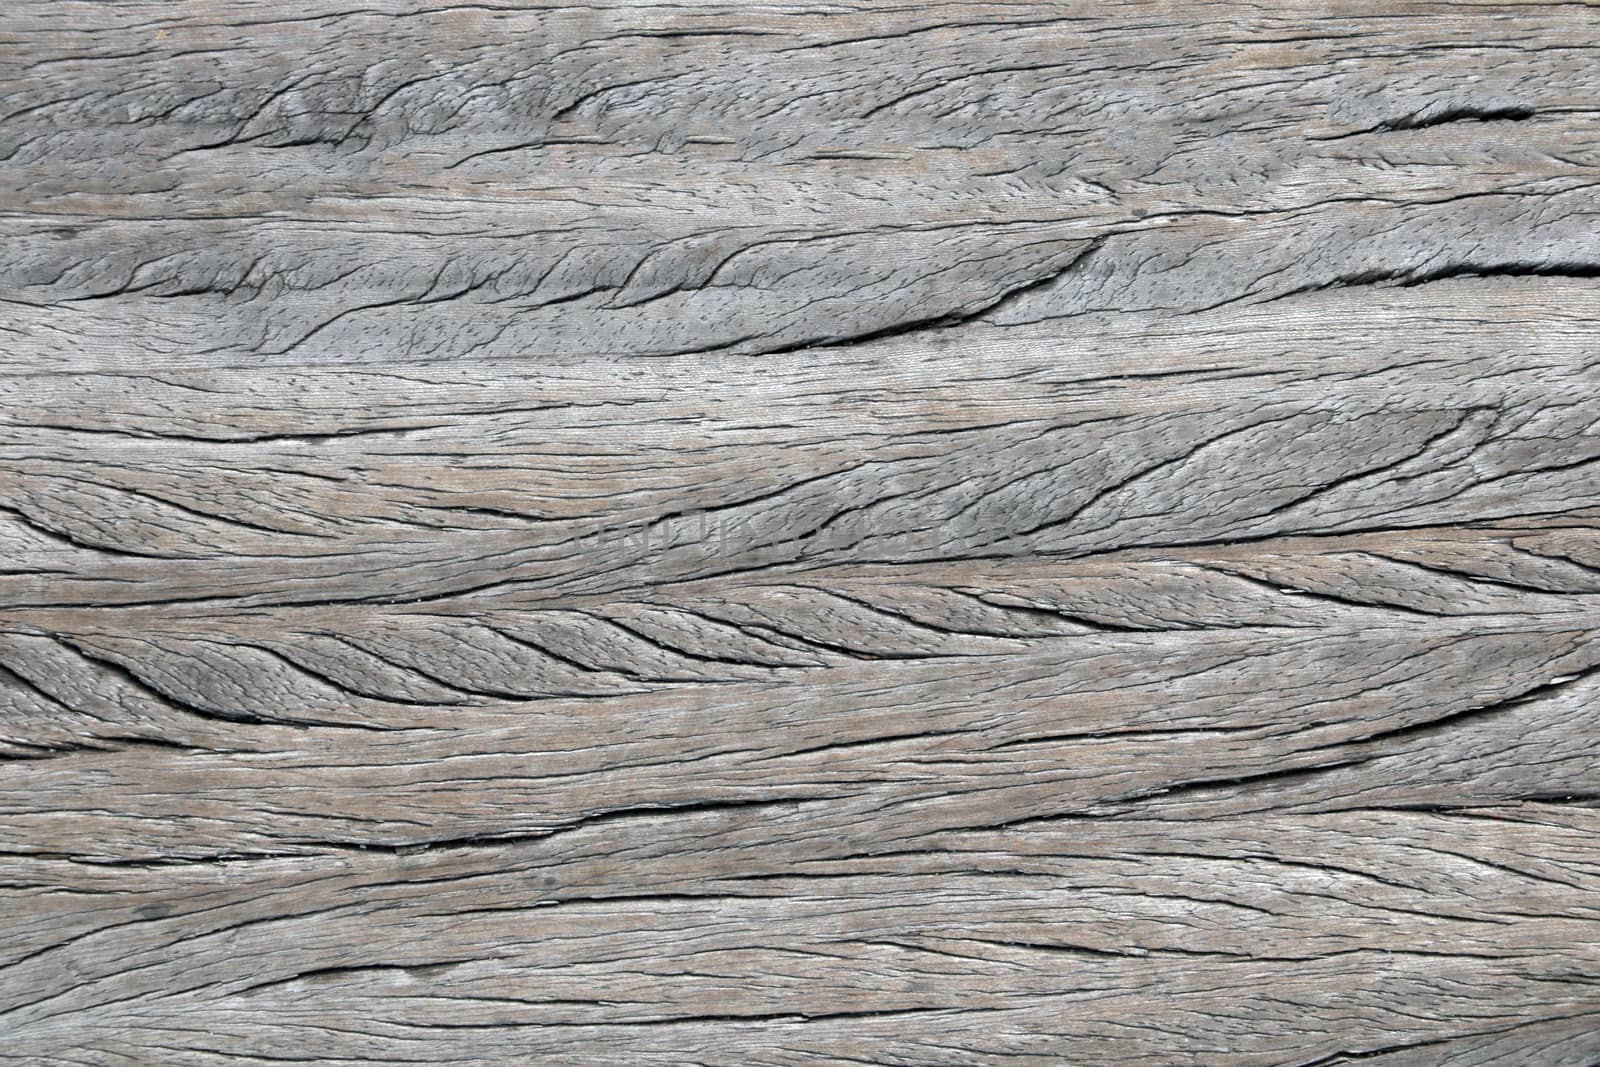 Wood texture with natural patterns, image can be used as a background for a design, top view. by kip02kas